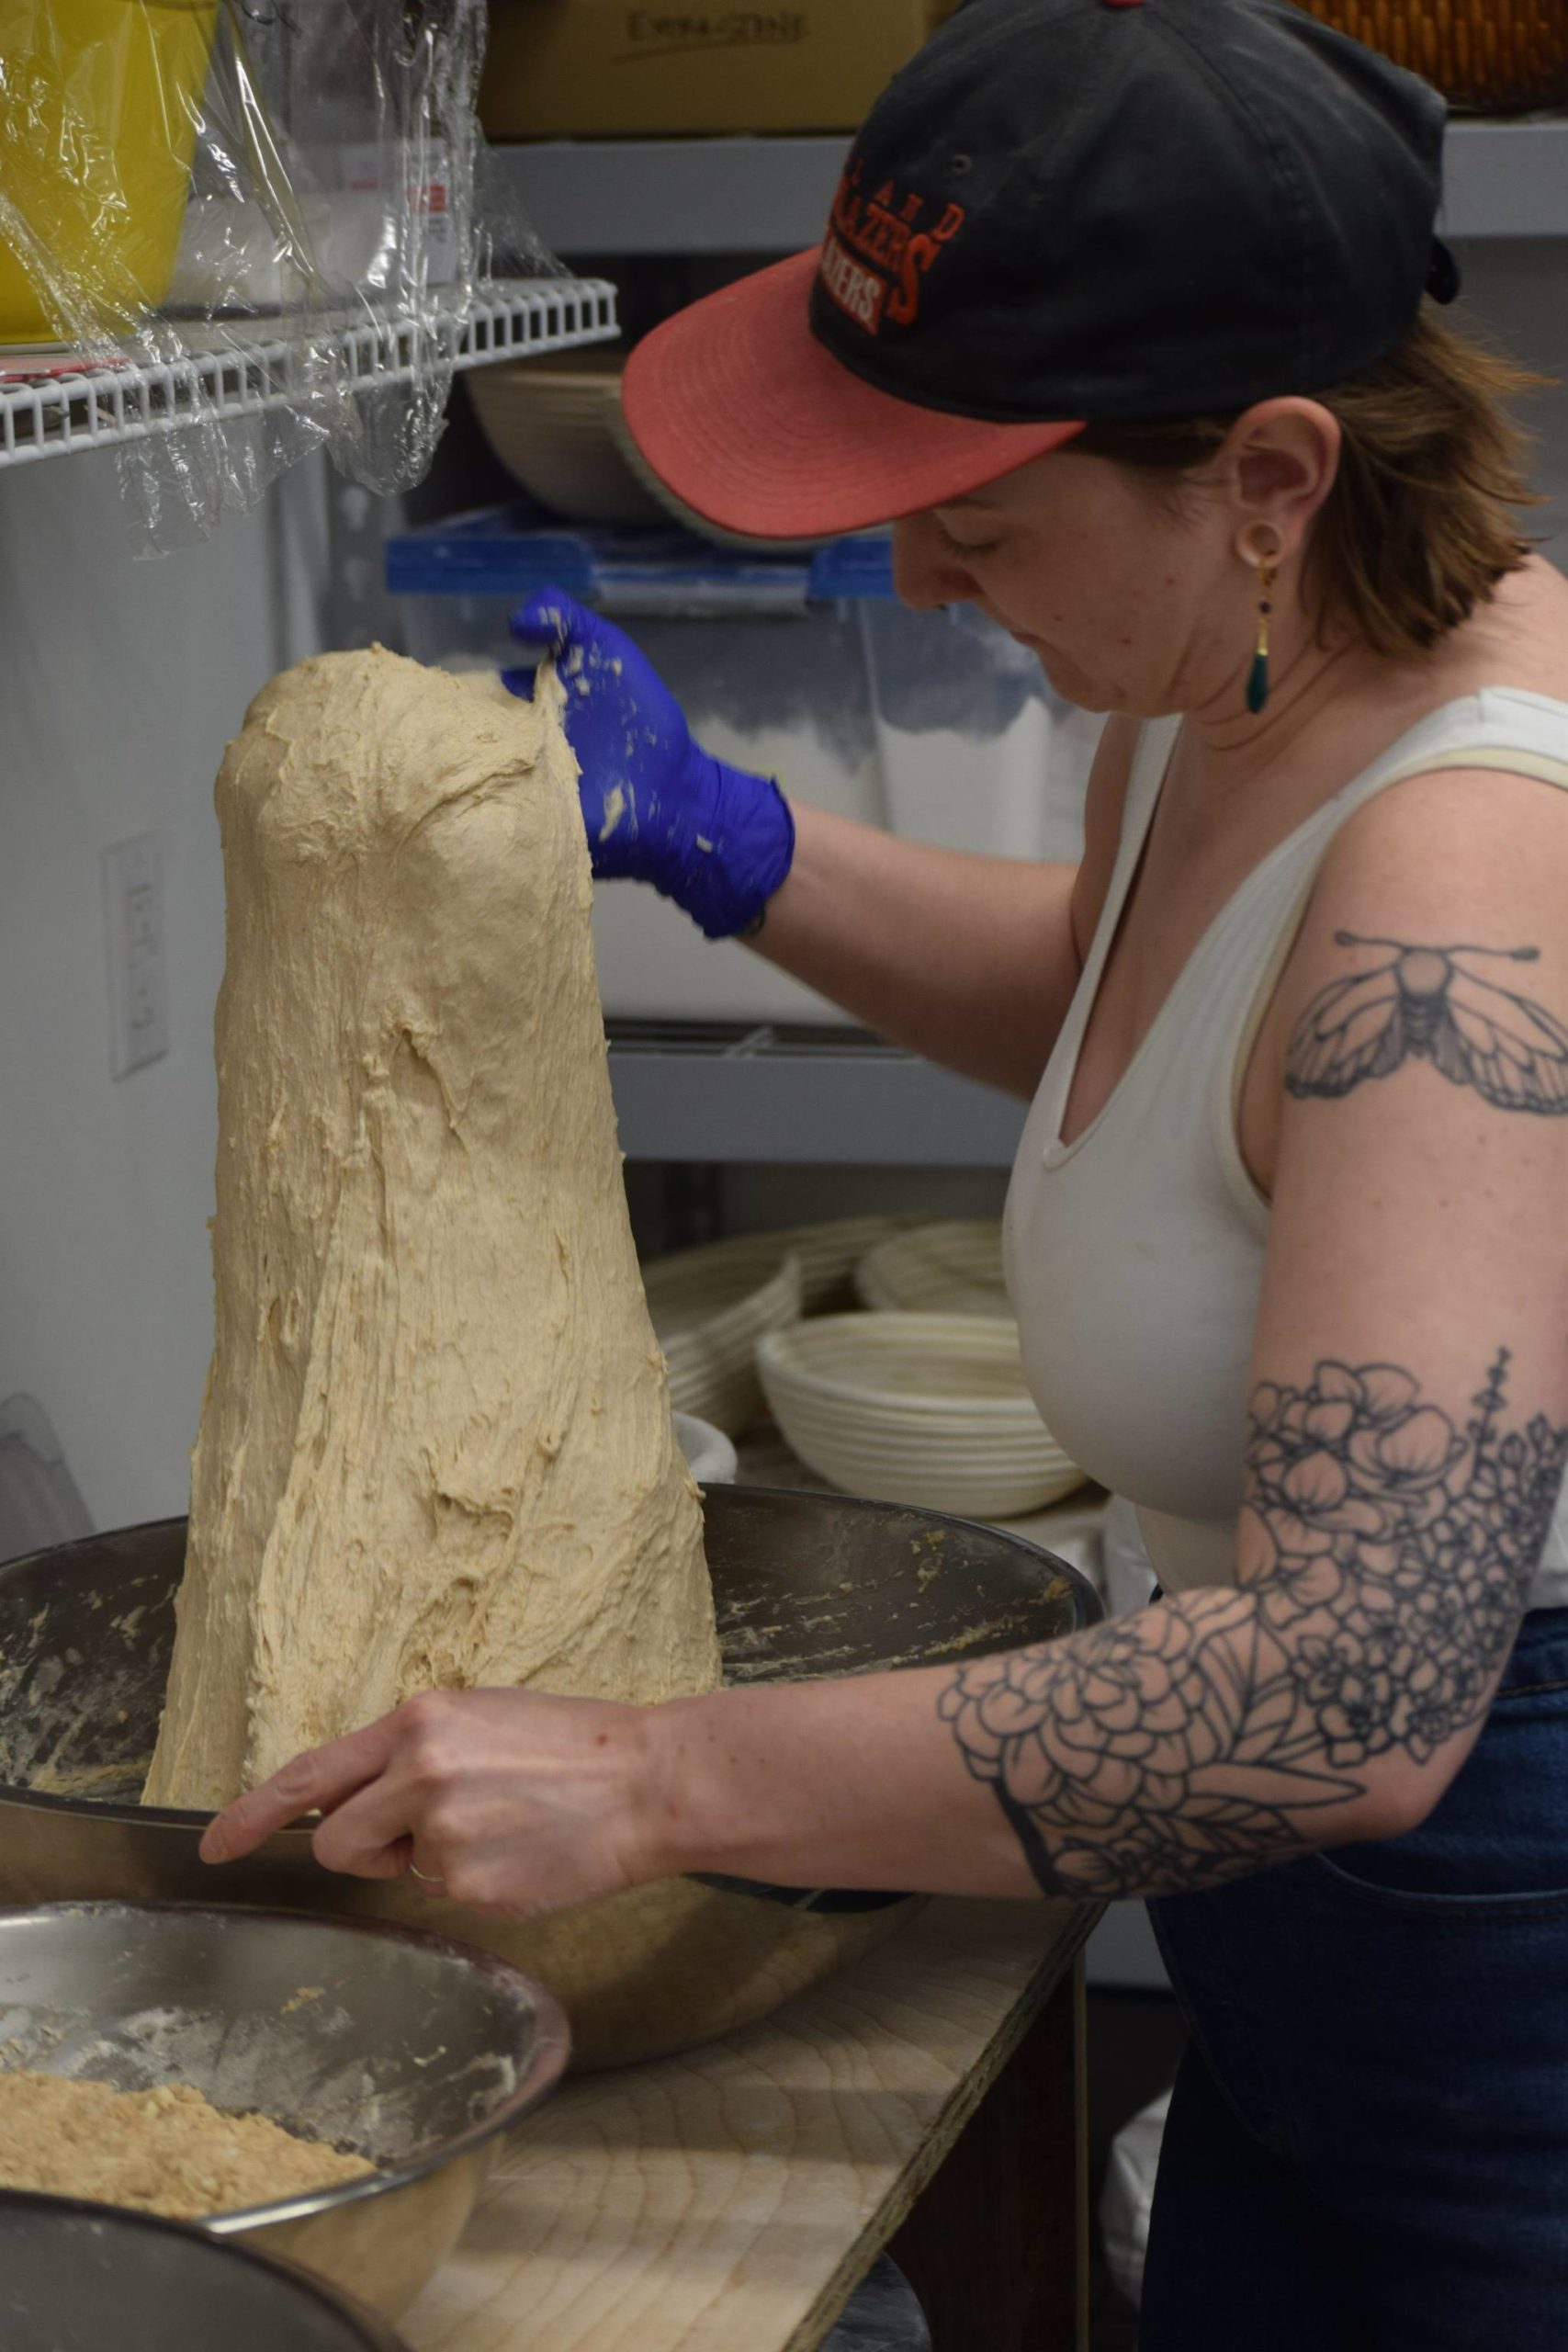 Lucy’s Market Head Baker Morgan Davie prepares sourdough at the shop in Soldotna, Alaska, on Wednesday, May 26, 2021. The starter is said to have been first cultivated in Germany over 250 years ago. (Camille Botello/Peninsula Clarion)